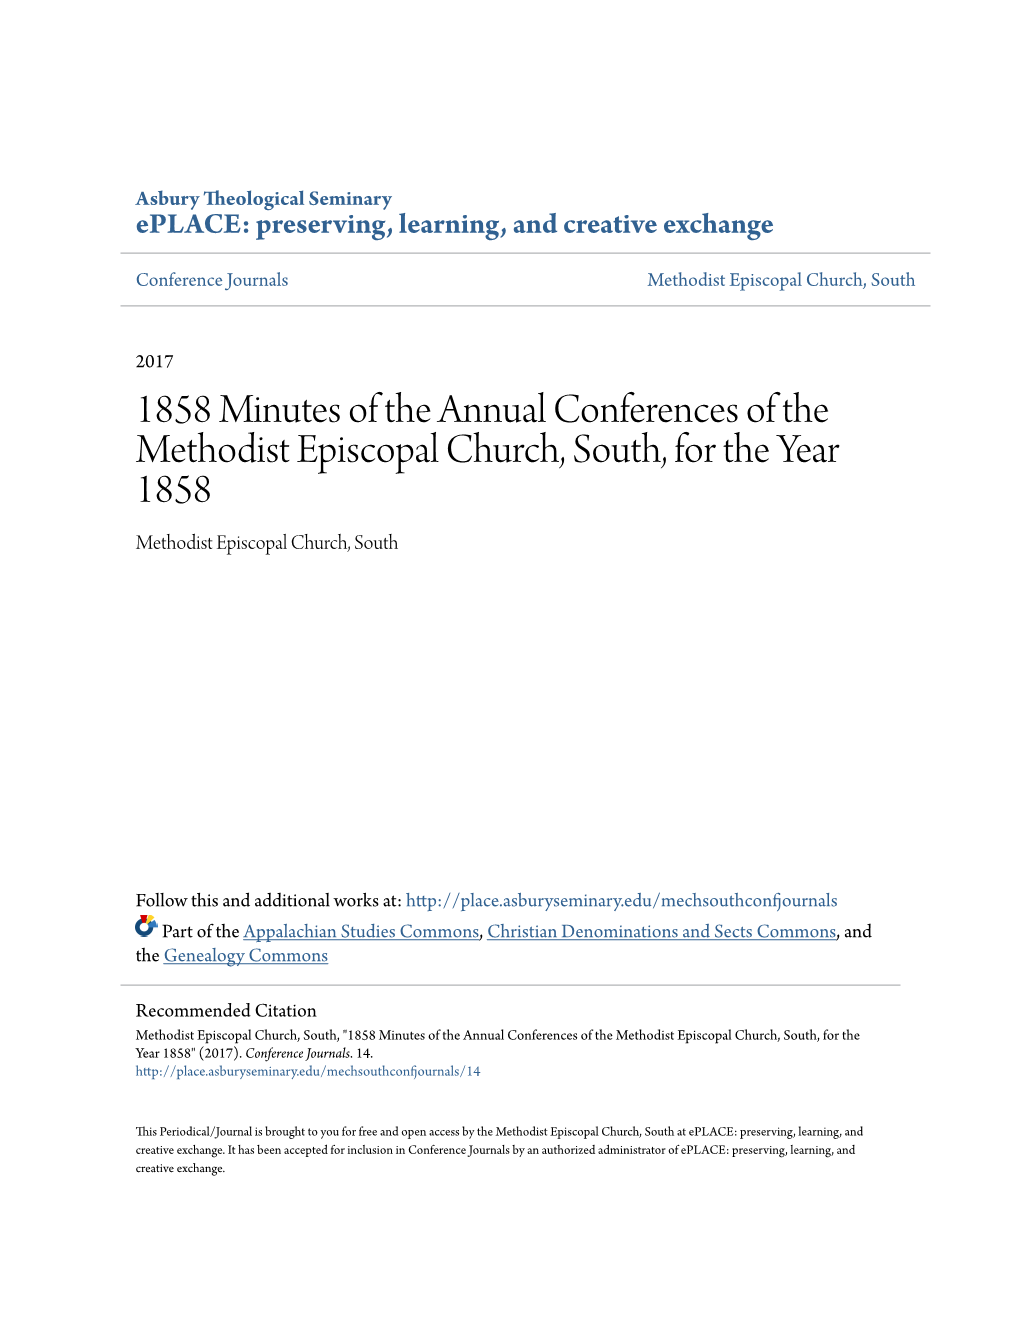 1858 Minutes of the Annual Conferences of the Methodist Episcopal Church, South, for the Year 1858 Methodist Episcopal Church, South